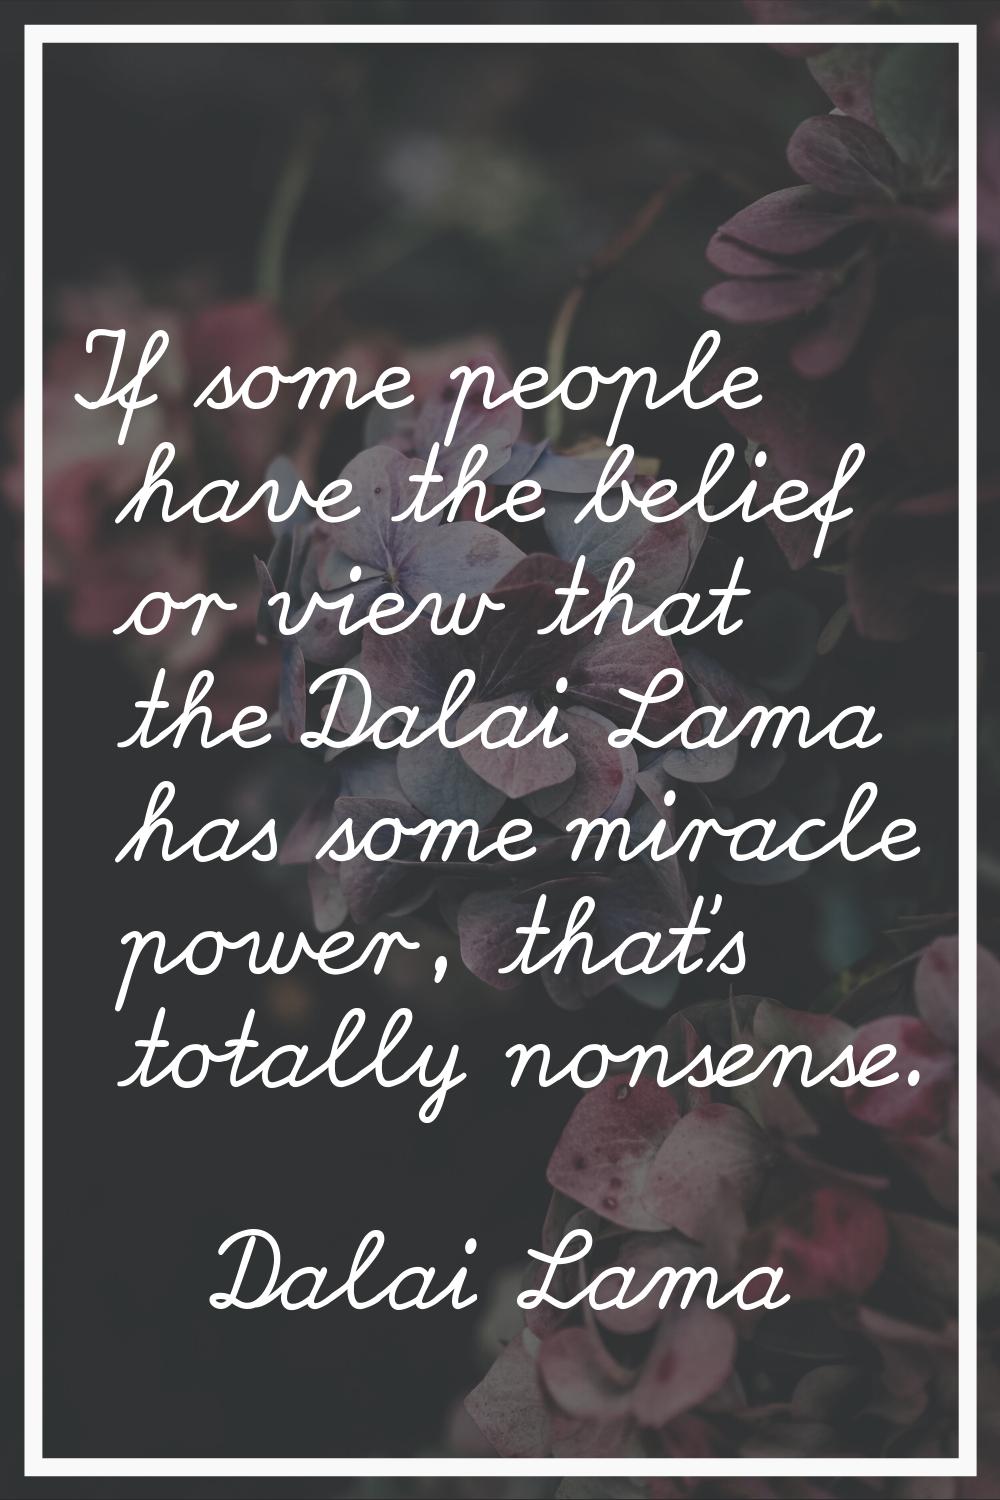 If some people have the belief or view that the Dalai Lama has some miracle power, that's totally n